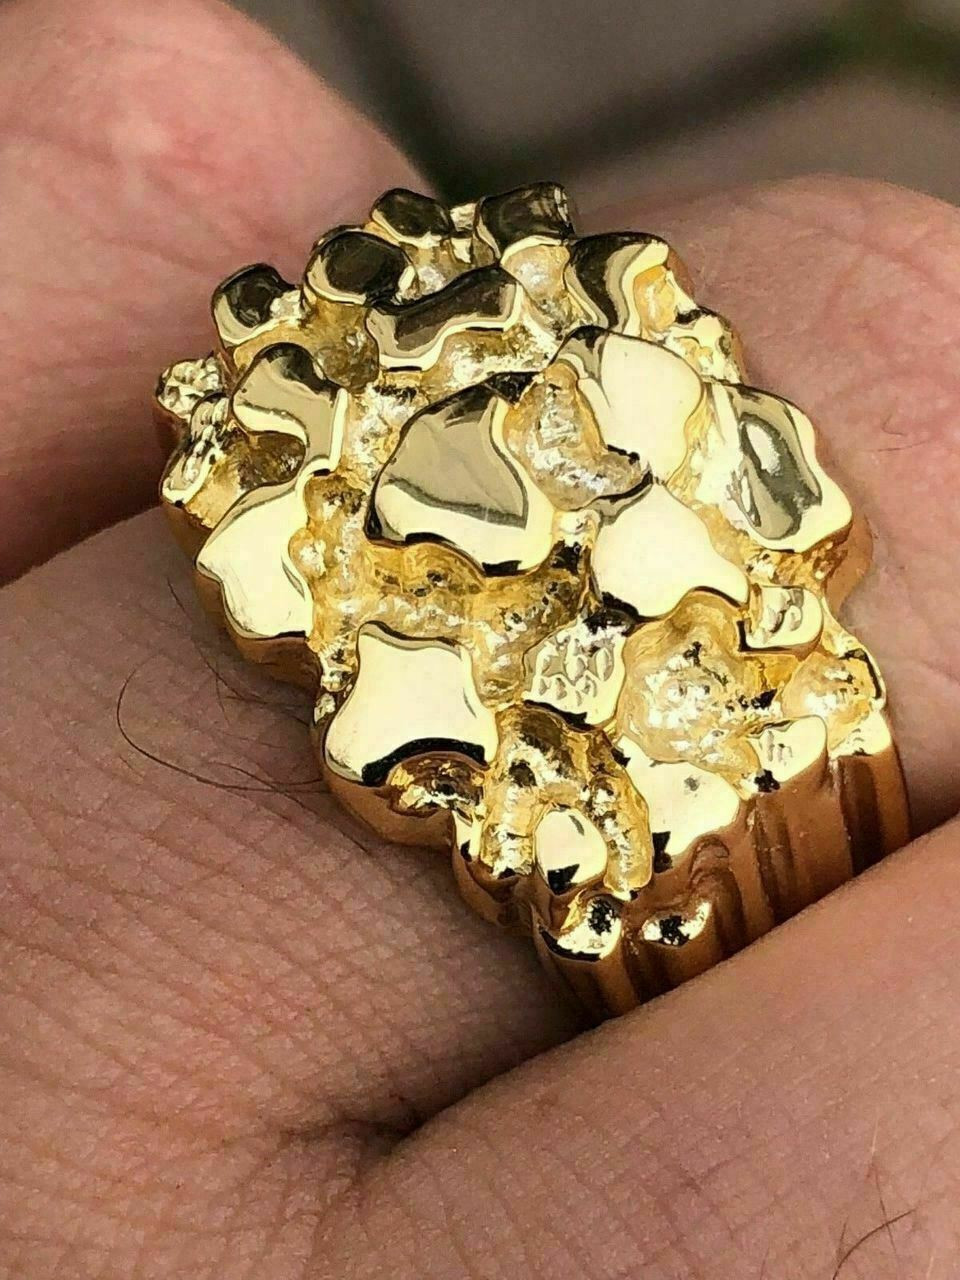 9 Beautiful Big Sized Gold Rings for Men and Women